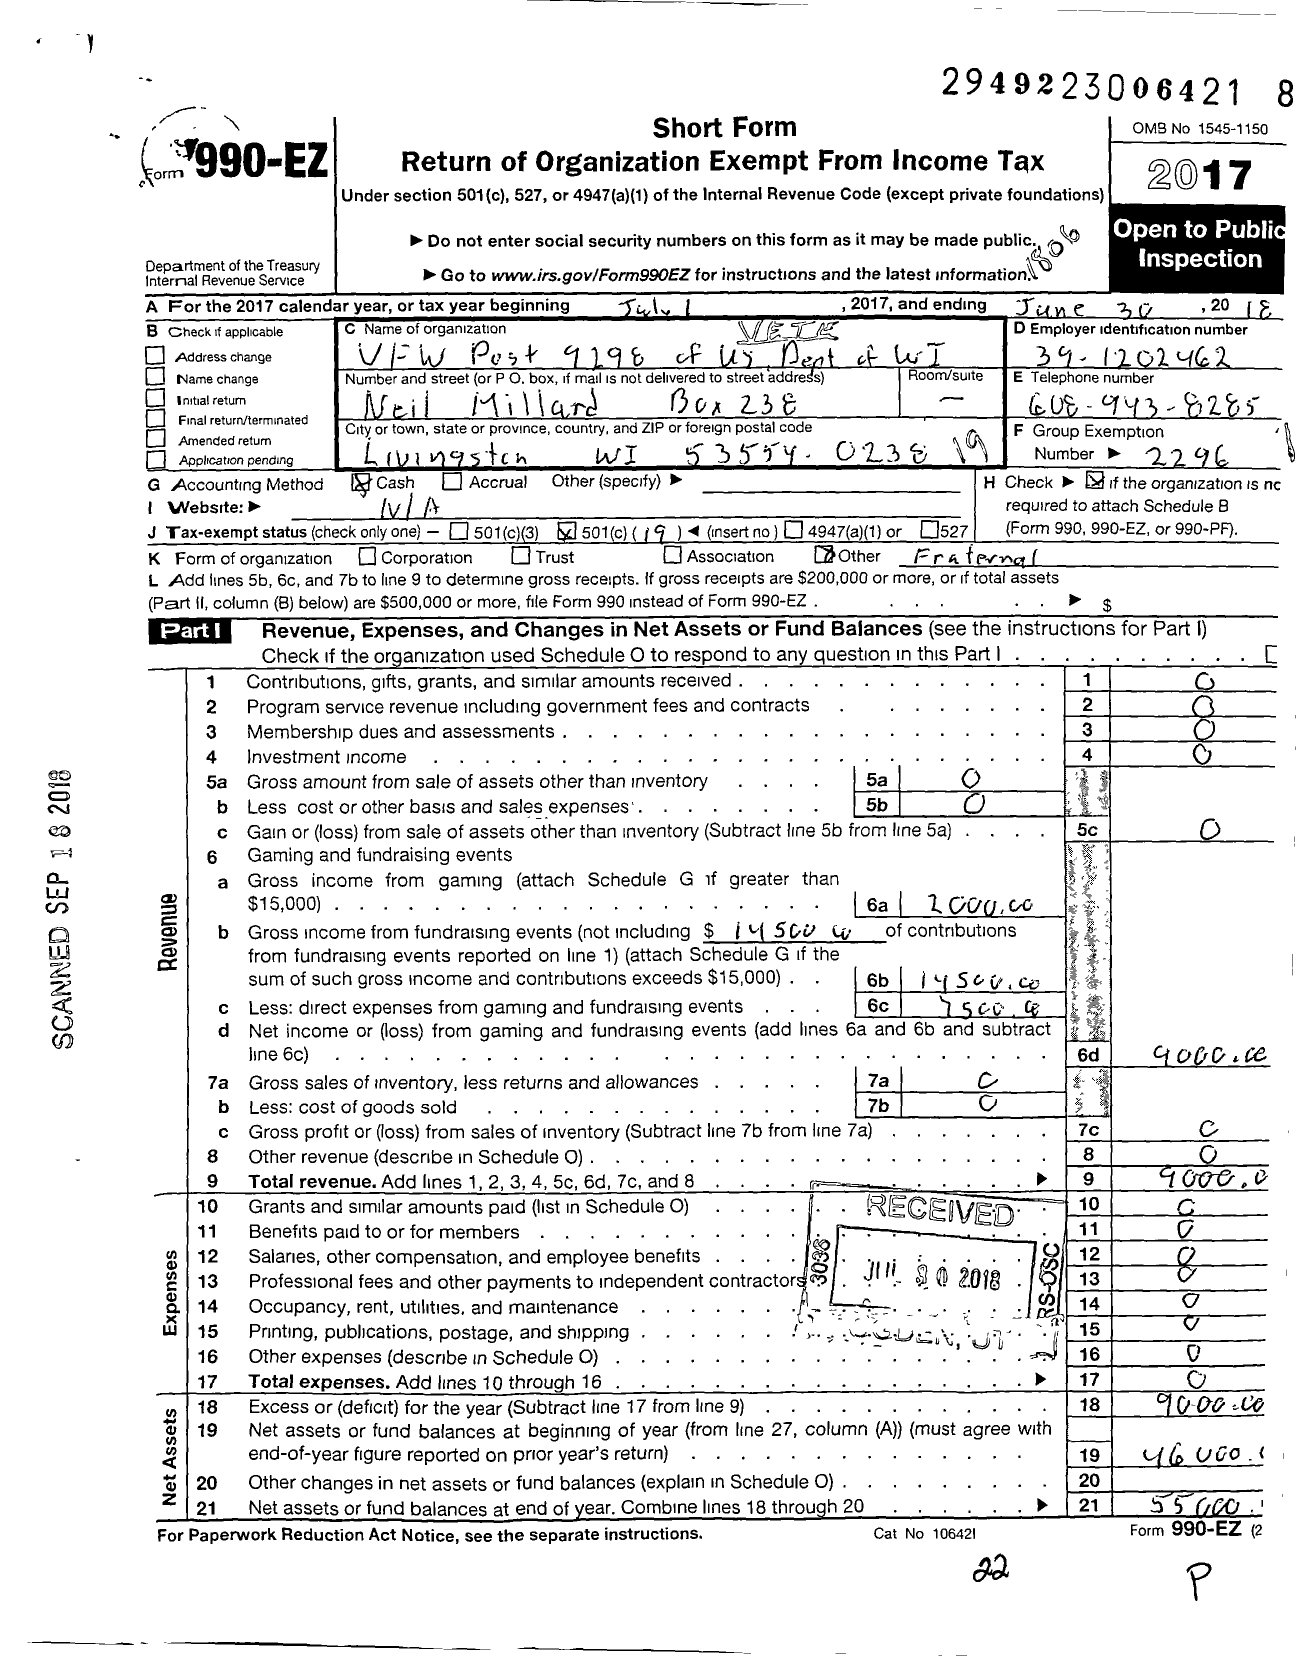 Image of first page of 2017 Form 990EO for VFW Wi - 9298 Ritchie-Bowers-Kohout Post